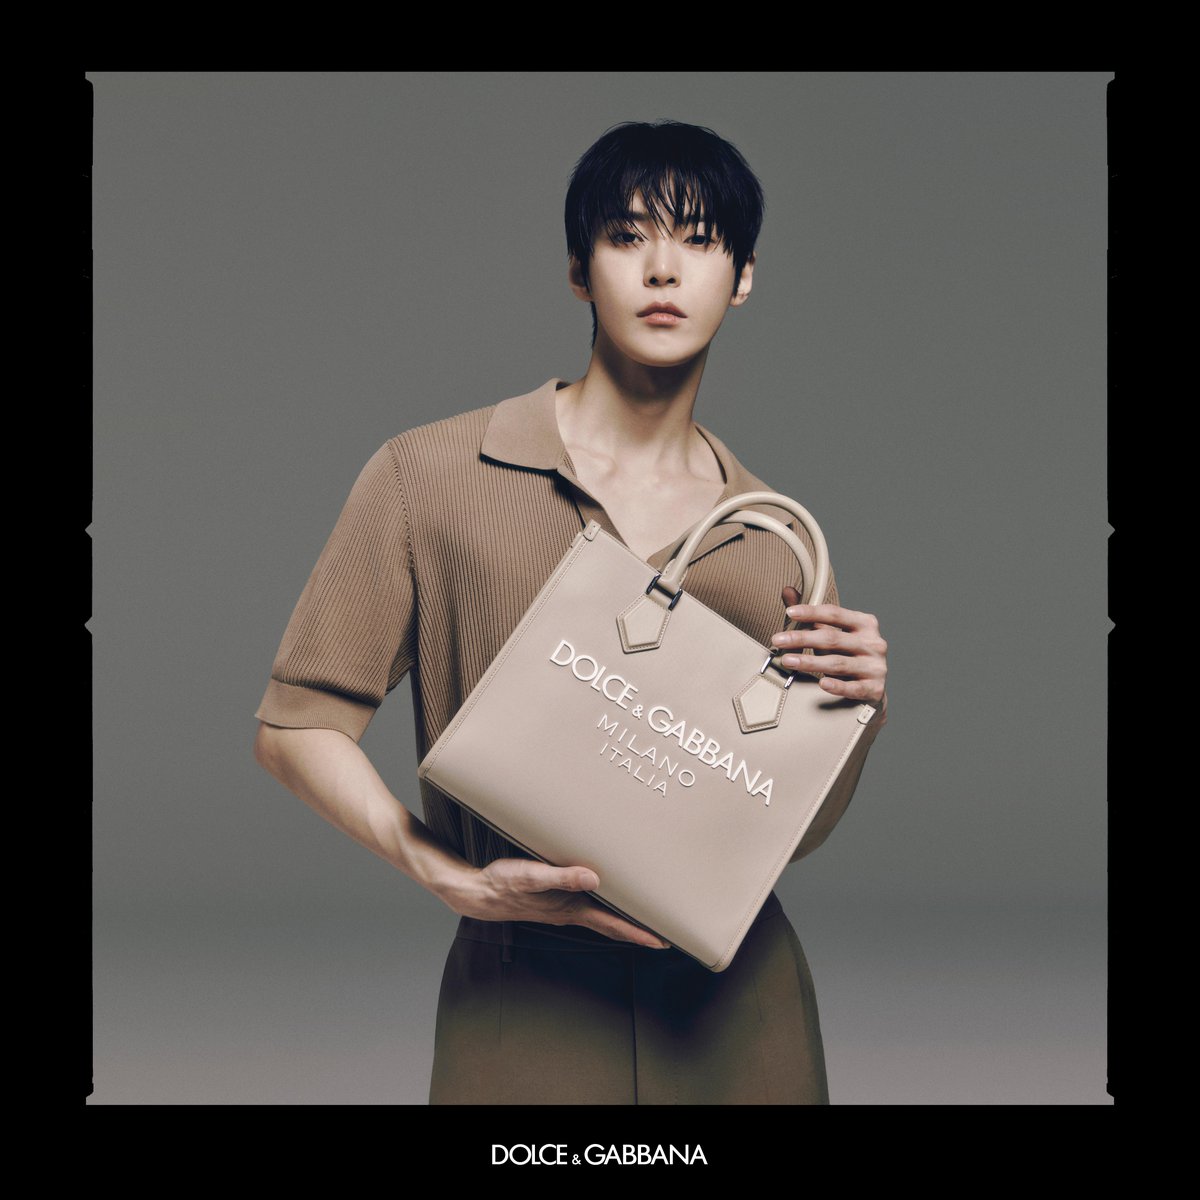 The new #DGSS24 Men’s Collection starring #DolceGabbana Global Ambassador Doyoung. Discover more at bit.ly/SS24ADV-Doyoung